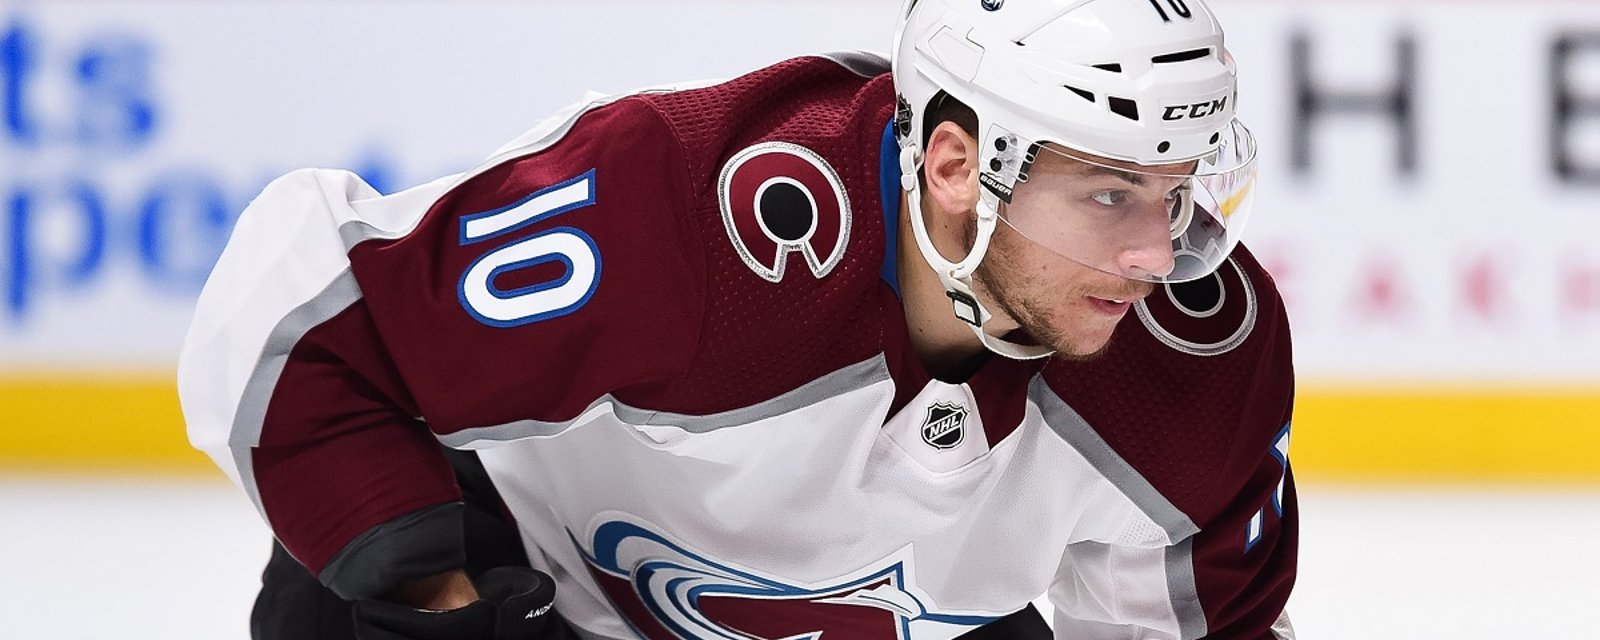 Rumor: Andrighetto has agreed to a KHL contract while playing for the Avalanche in the Stanley Cup Playoffs.